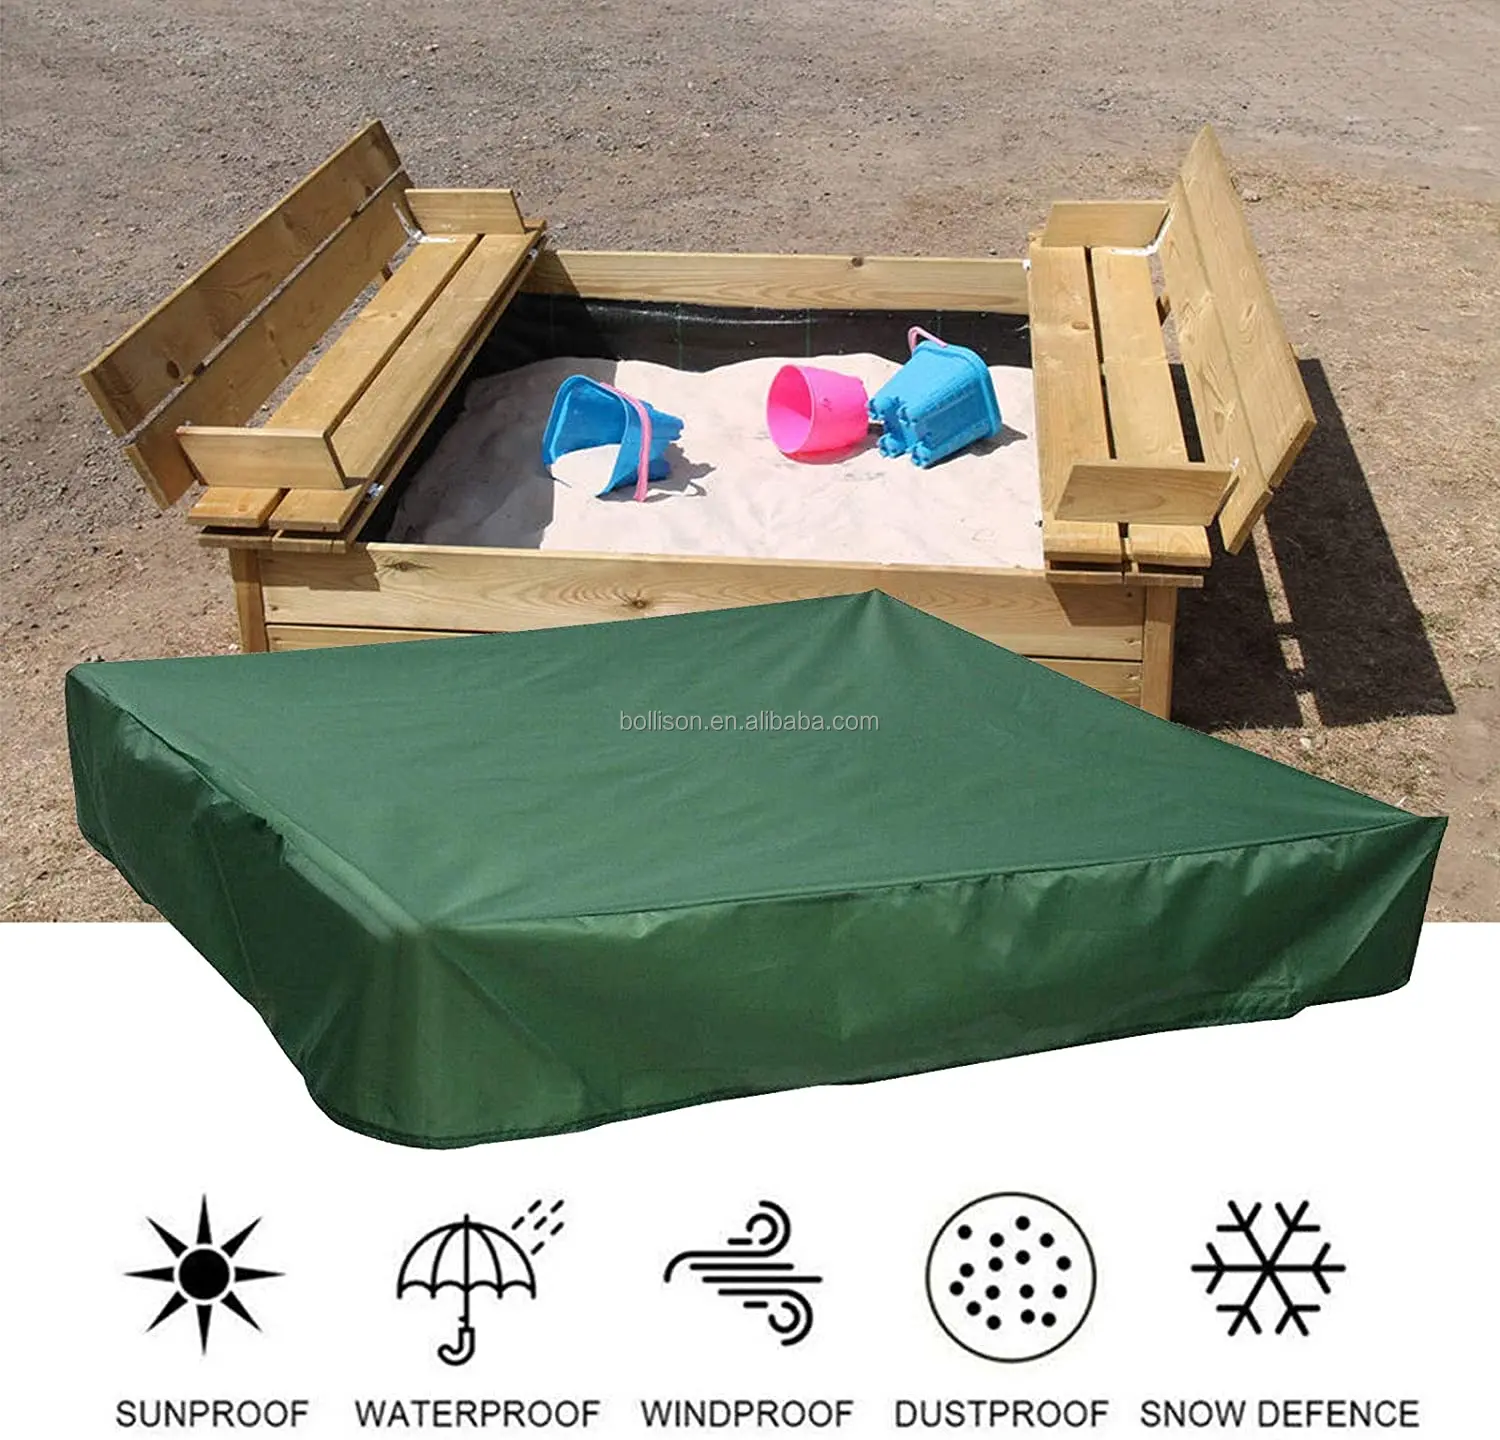 lzndeal Sandbox Cover,Cover,Dustproof Protection Sandbox Cover with Drawstring Waterproof Sandpit Pool Cover 